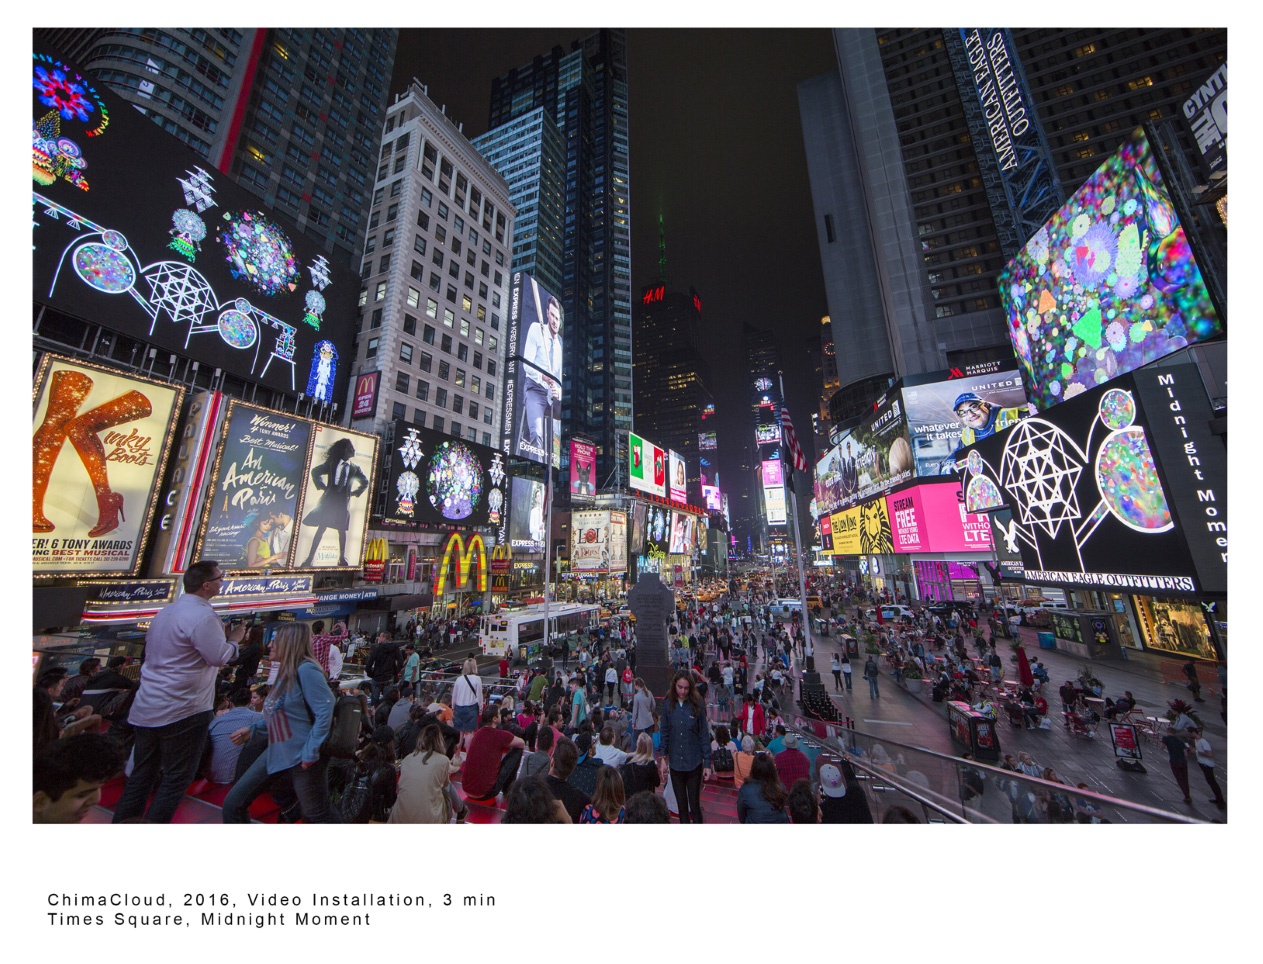 Colorful, glowing screens flank billboards and Broadway posters along a city skyline in New York's Times Square at night.